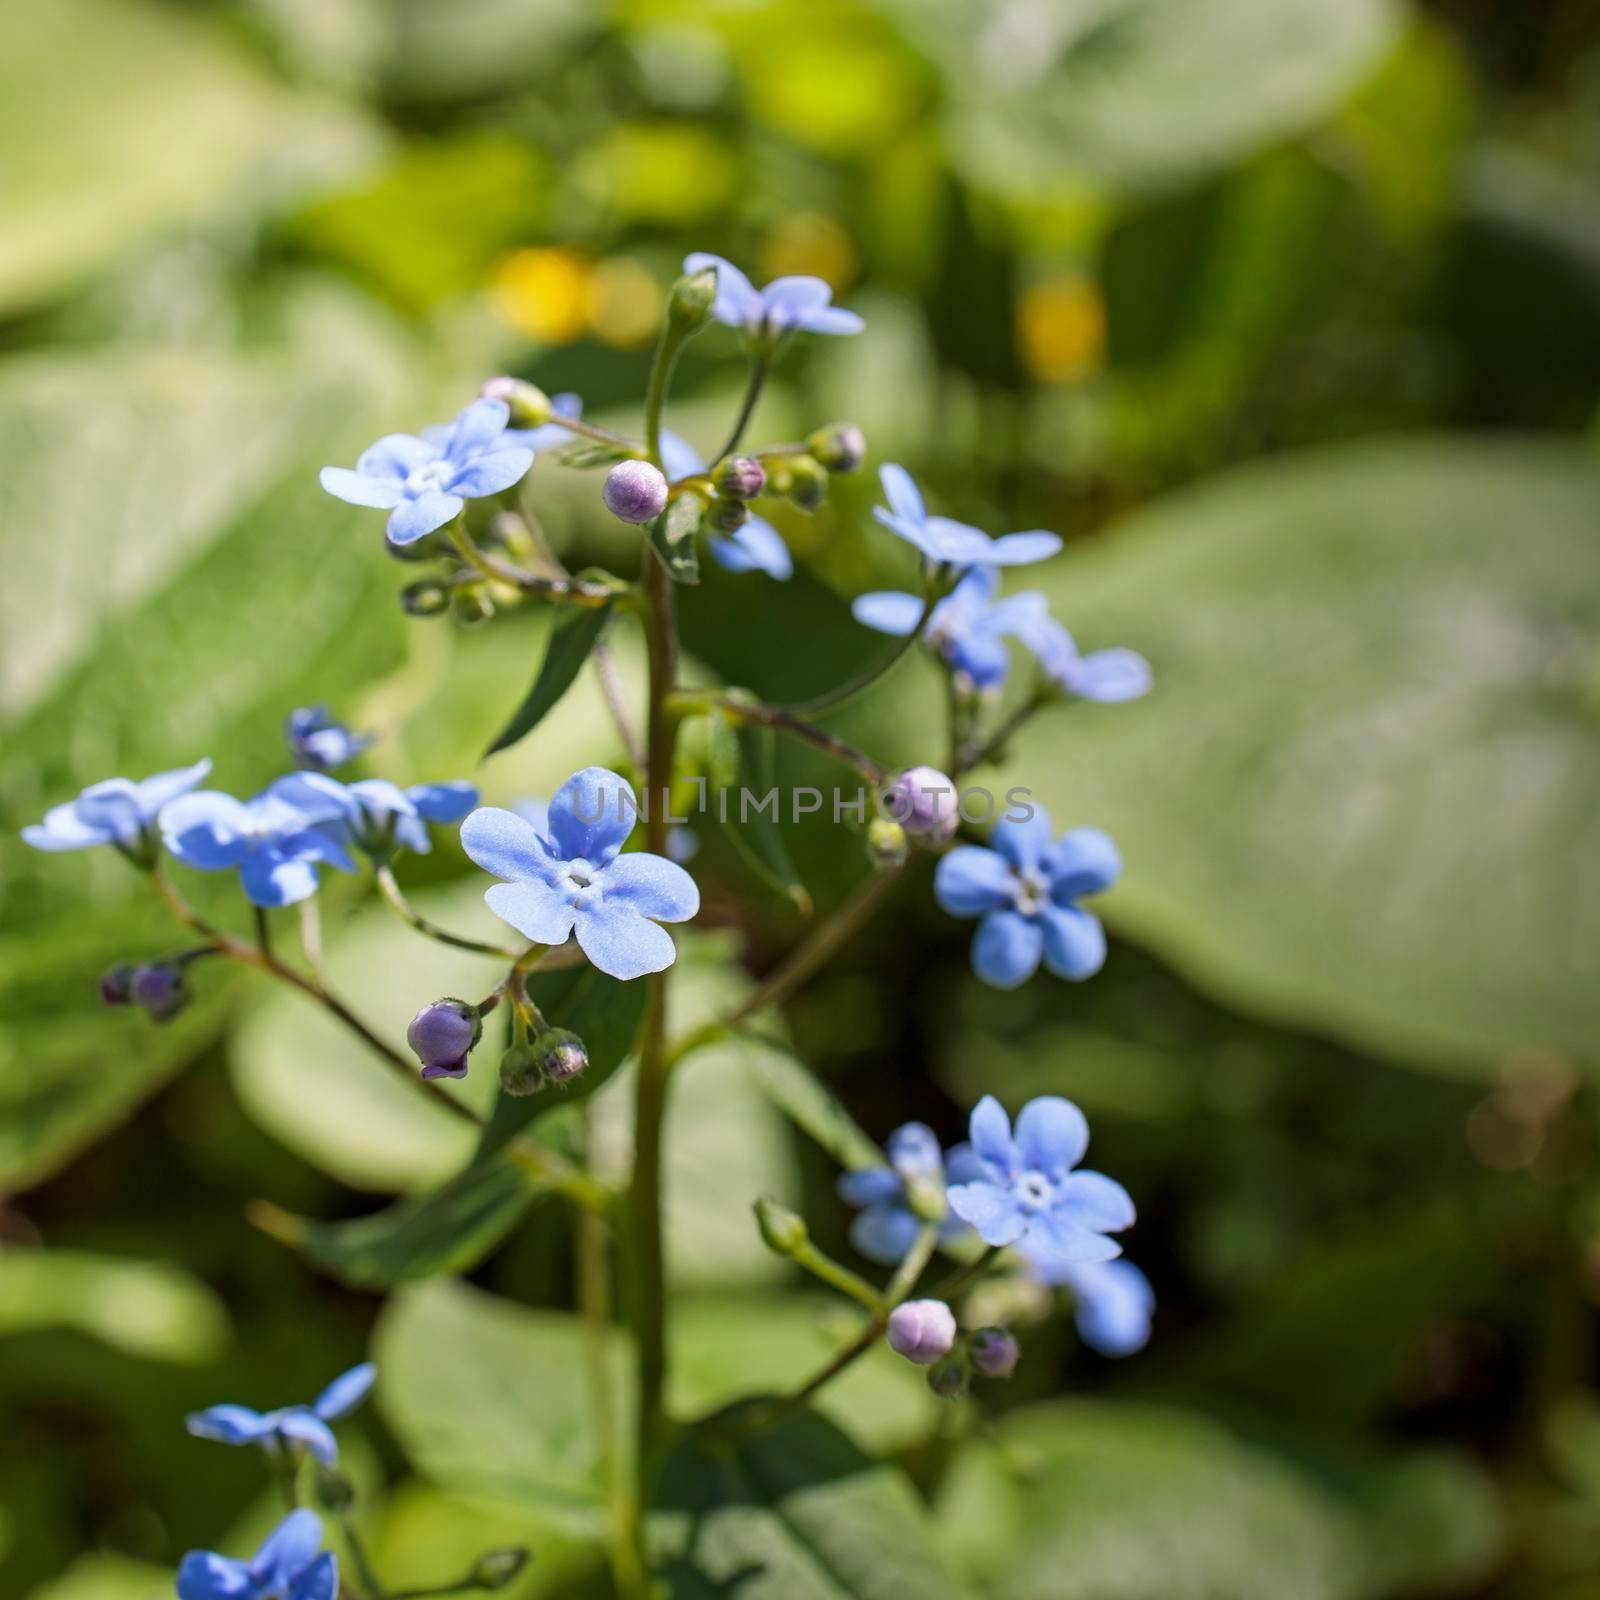 Brunnera macrophylla, the Siberian bugloss, great forget-me-not, largeleaf brunnera or heartleaf, is a species of flowering plant in the family Boraginaceae, by elenarostunova